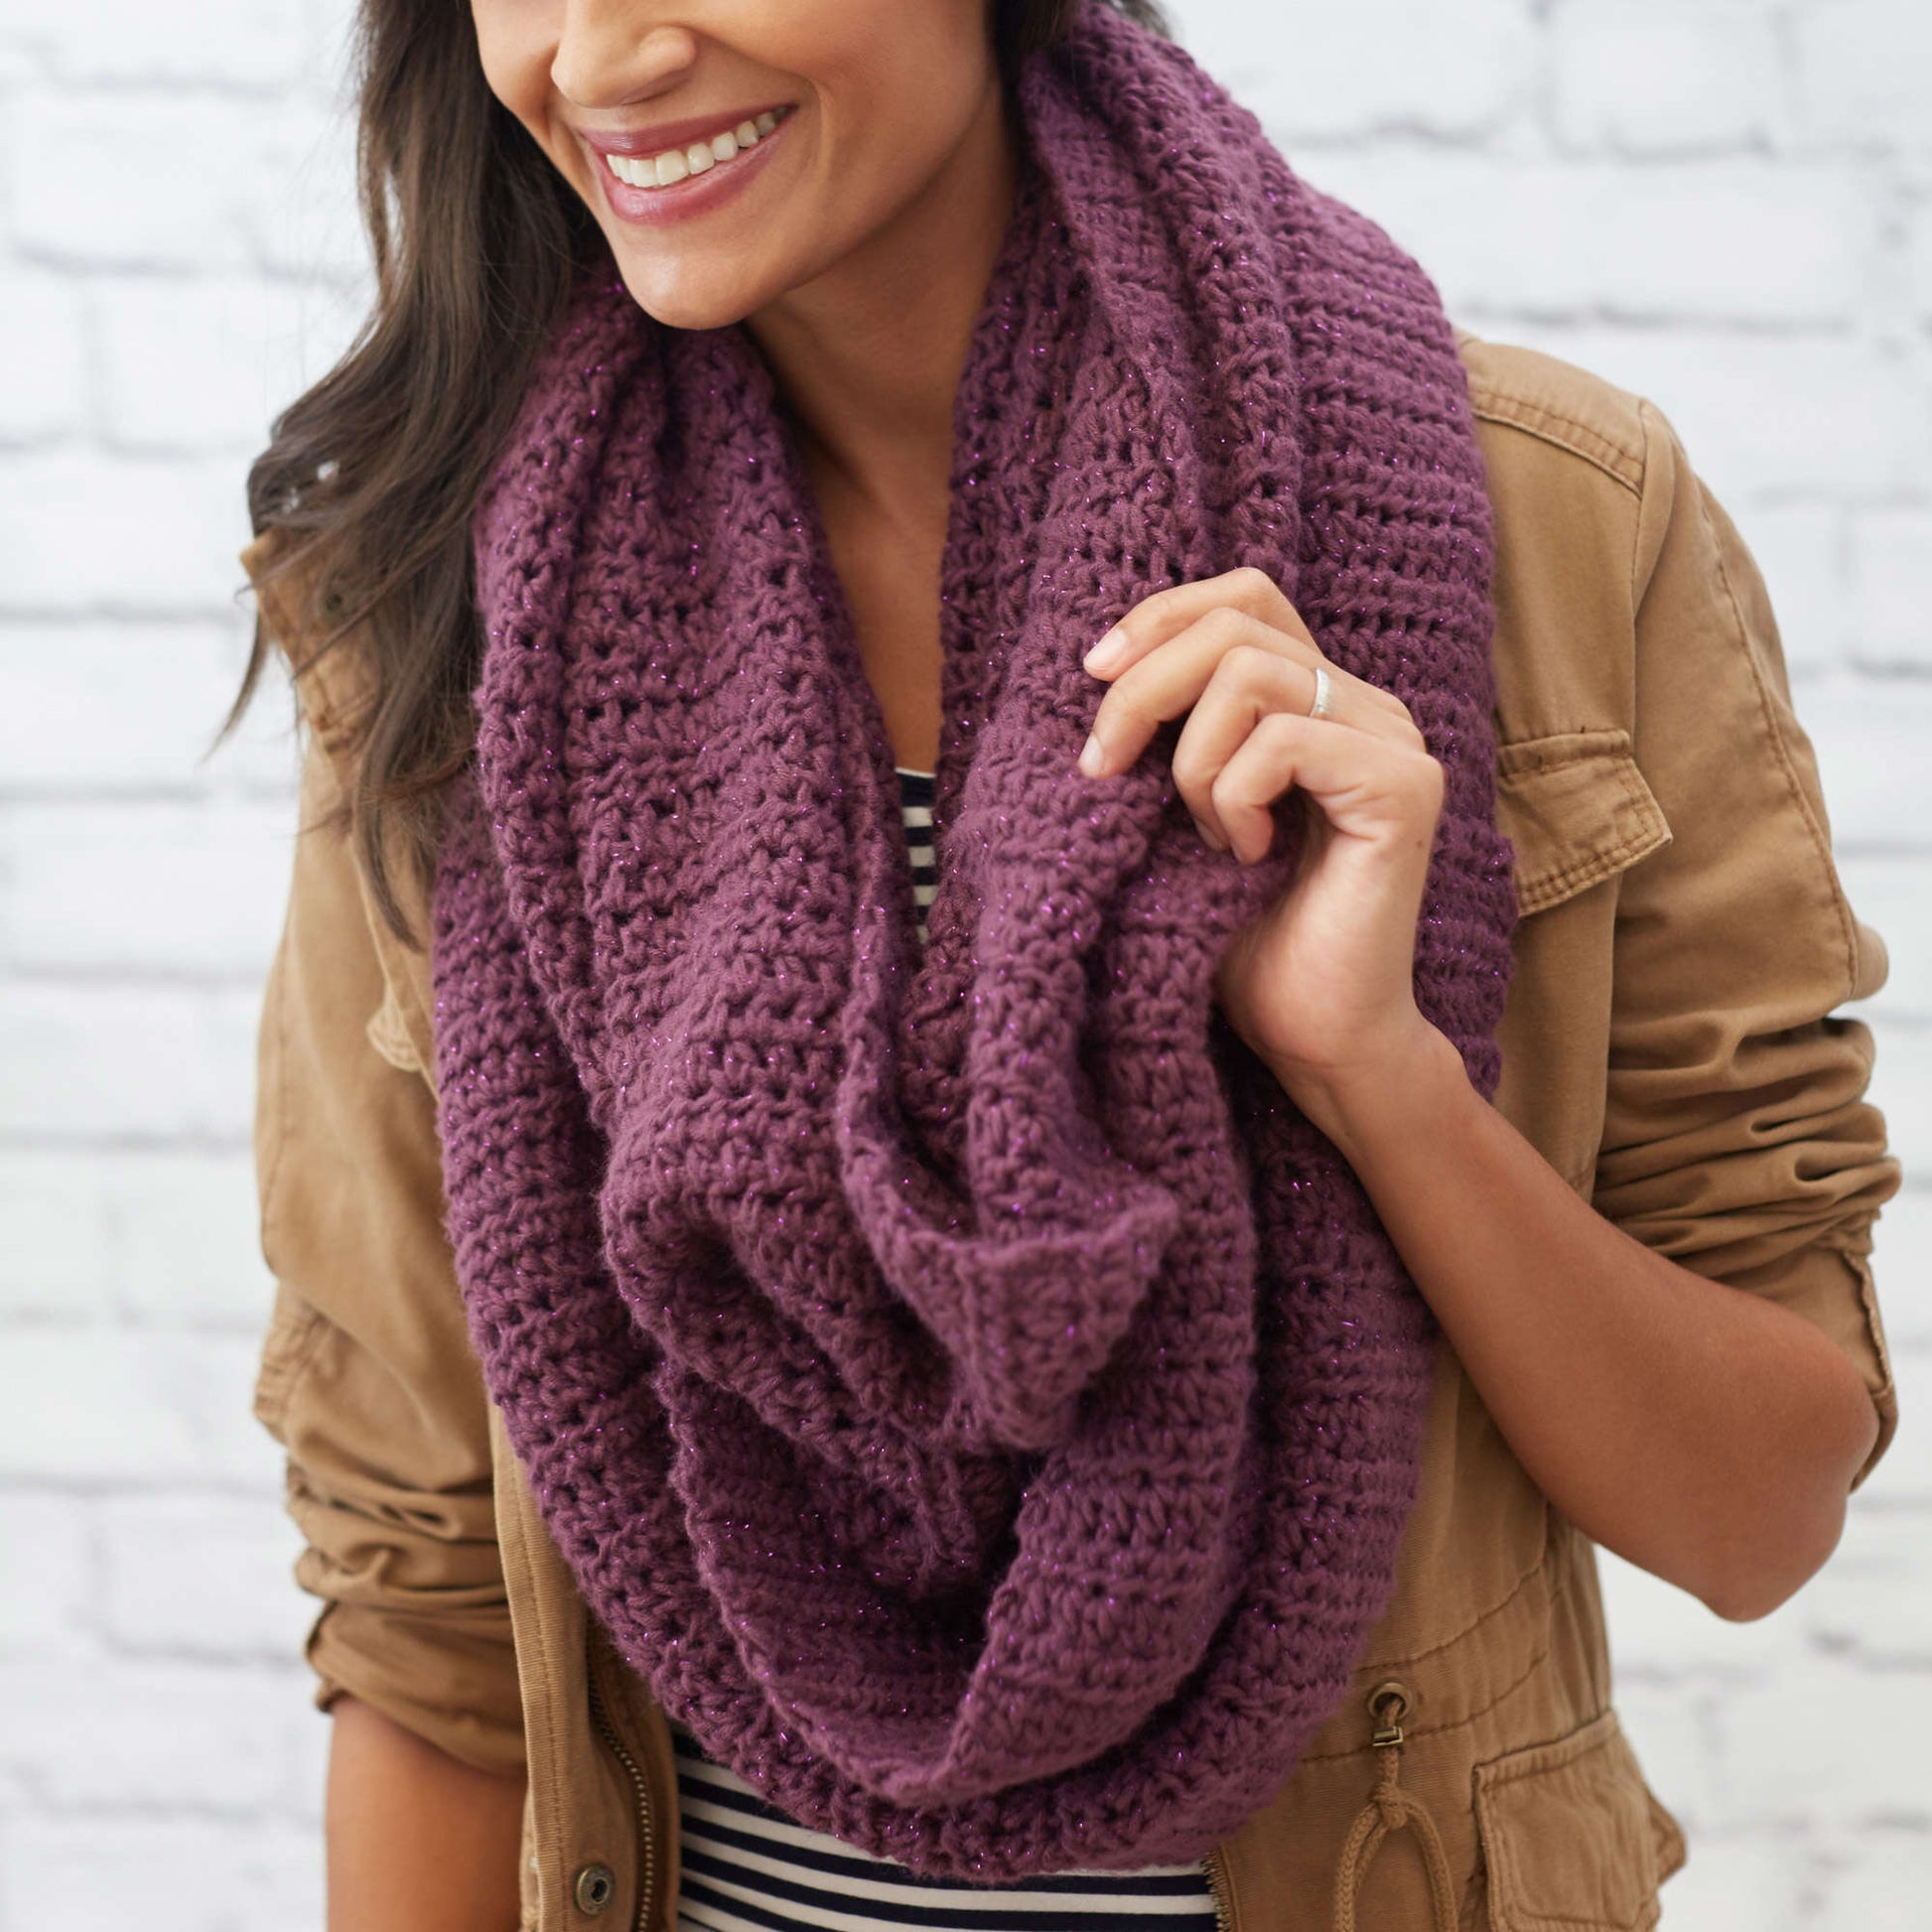 Free Red Heart Supersized Chic Cowl Crochet Pattern